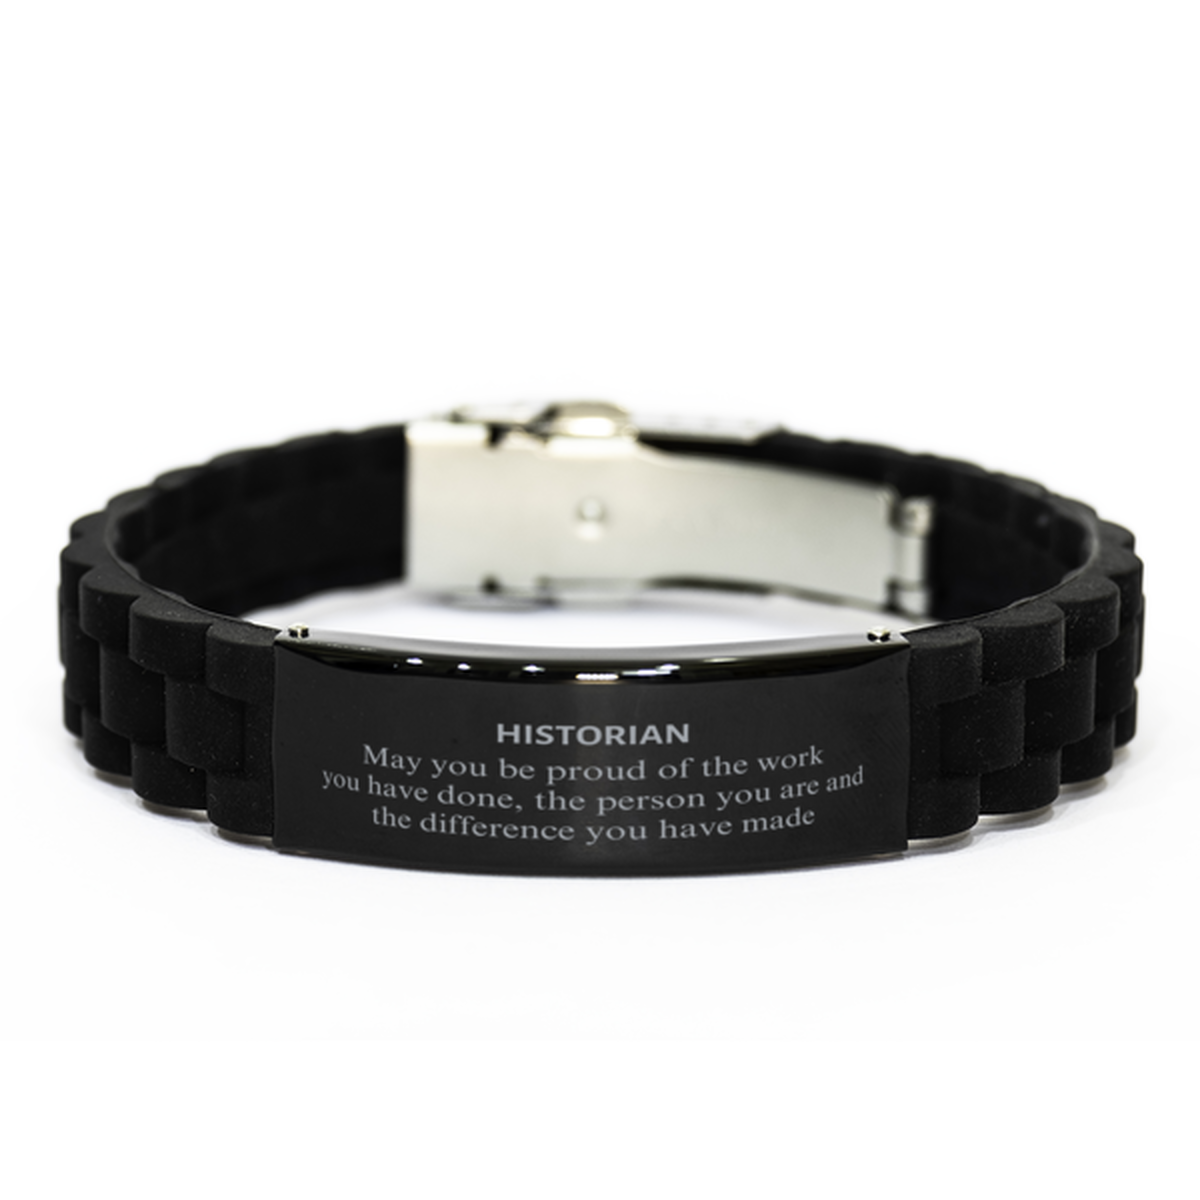 Historian May you be proud of the work you have done, Retirement Historian Black Glidelock Clasp Bracelet for Colleague Appreciation Gifts Amazing for Historian